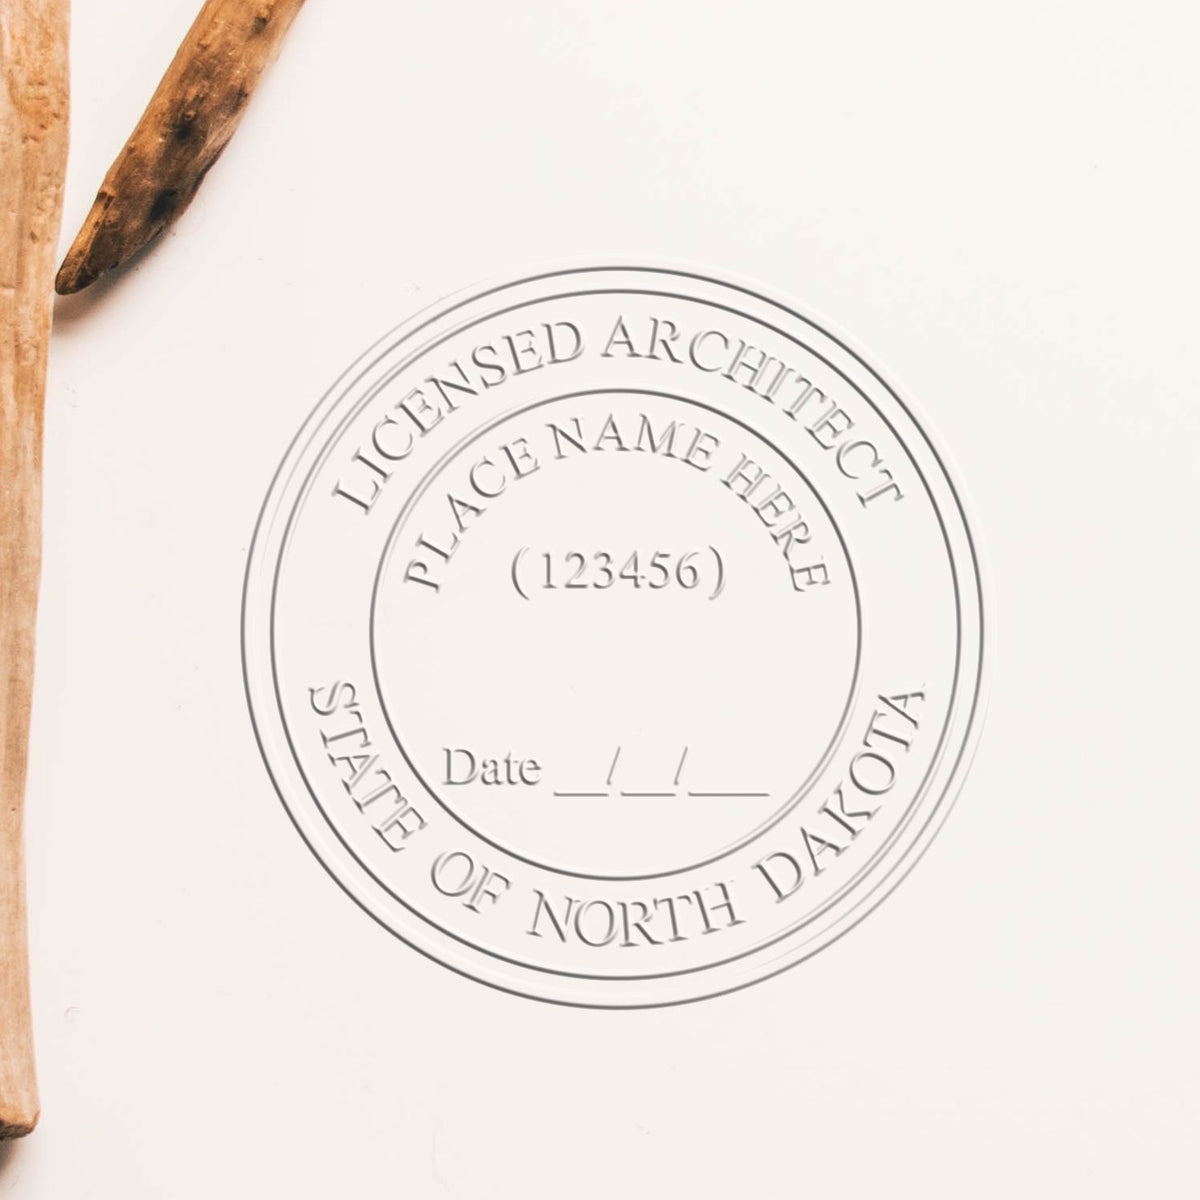 The State of North Dakota Long Reach Architectural Embossing Seal stamp impression comes to life with a crisp, detailed photo on paper - showcasing true professional quality.